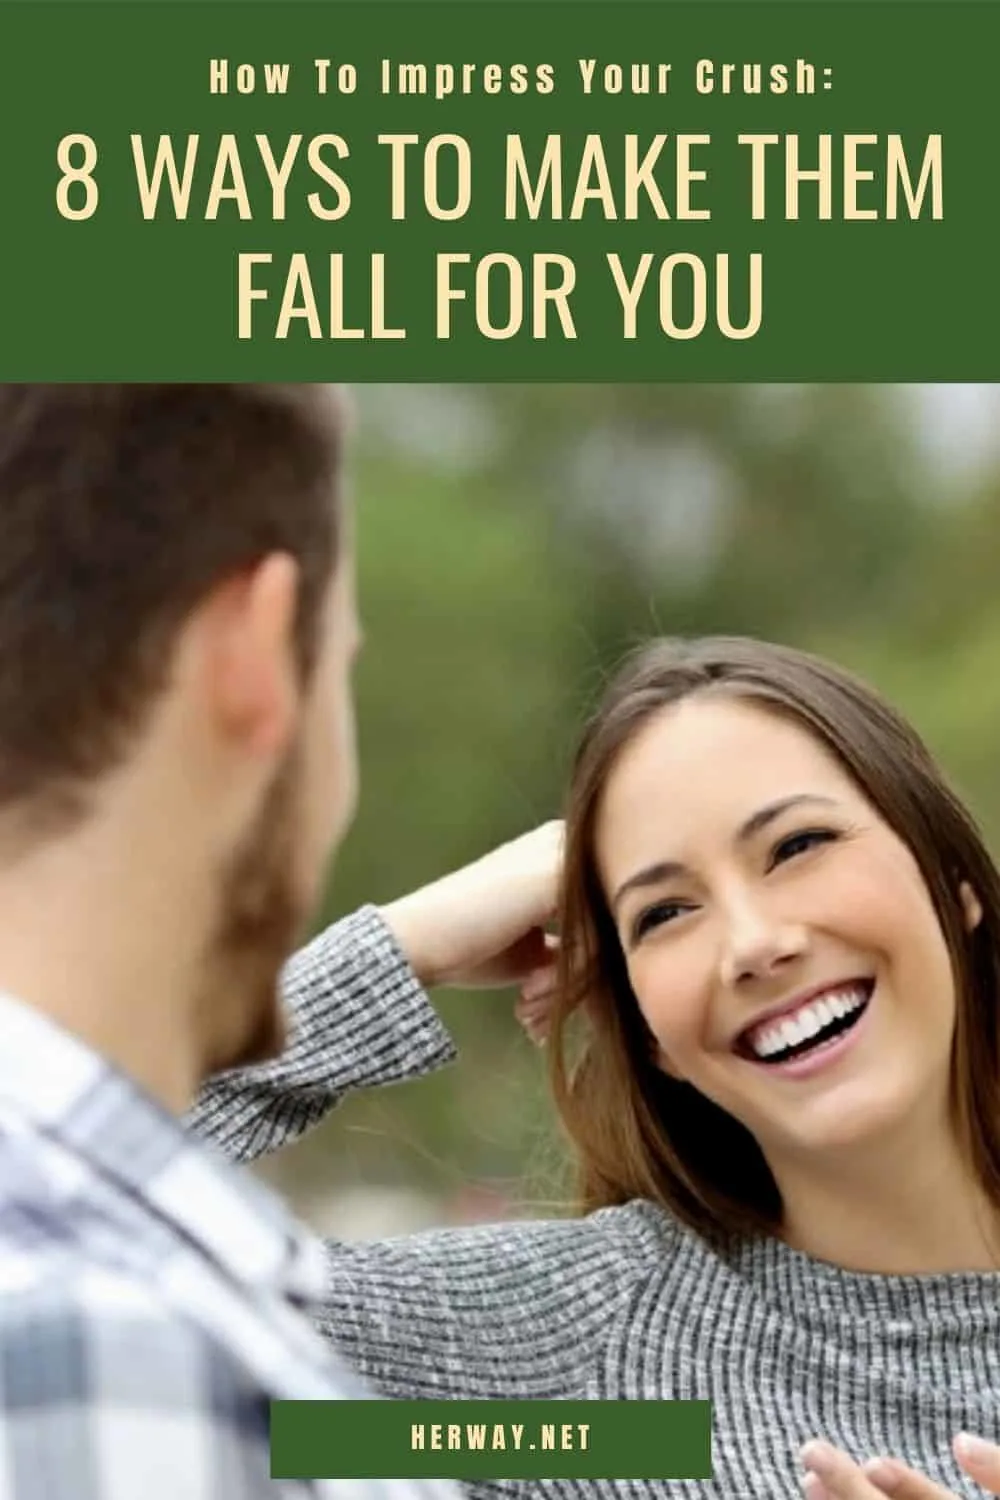 How To Impress Your Crush: 8 Ways To Make Them Fall For You pinterest